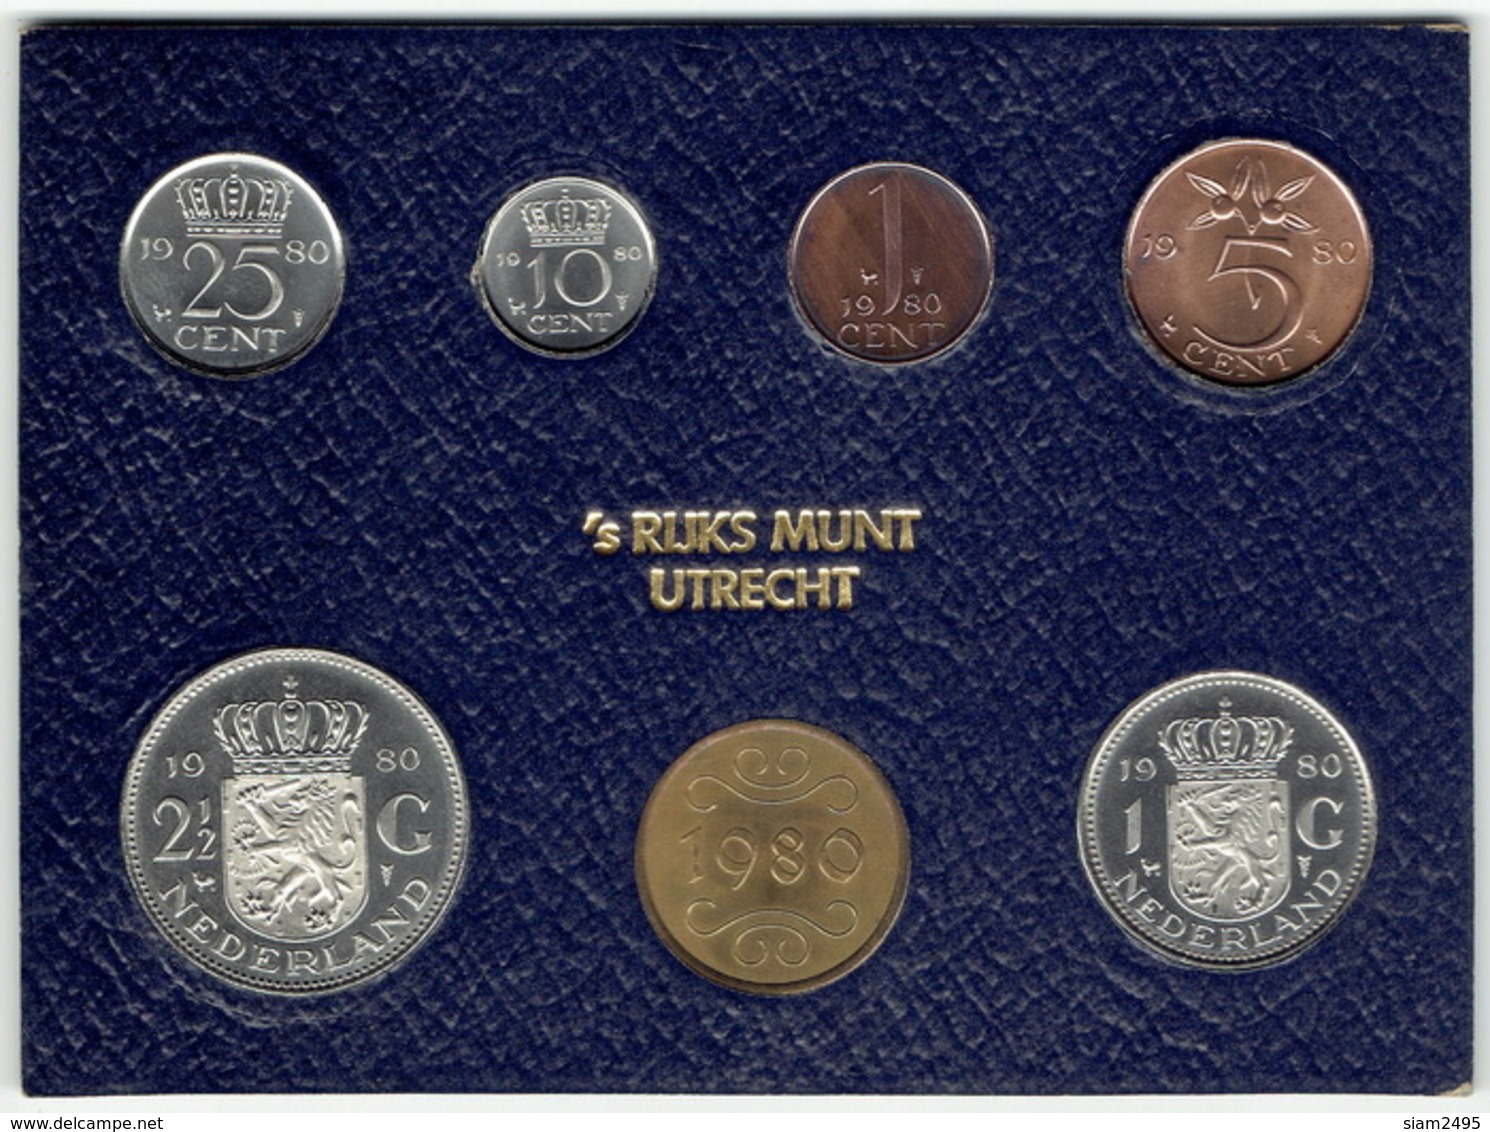 The Netherlands 1980, Mint Year Set With Token. - Mint Sets & Proof Sets